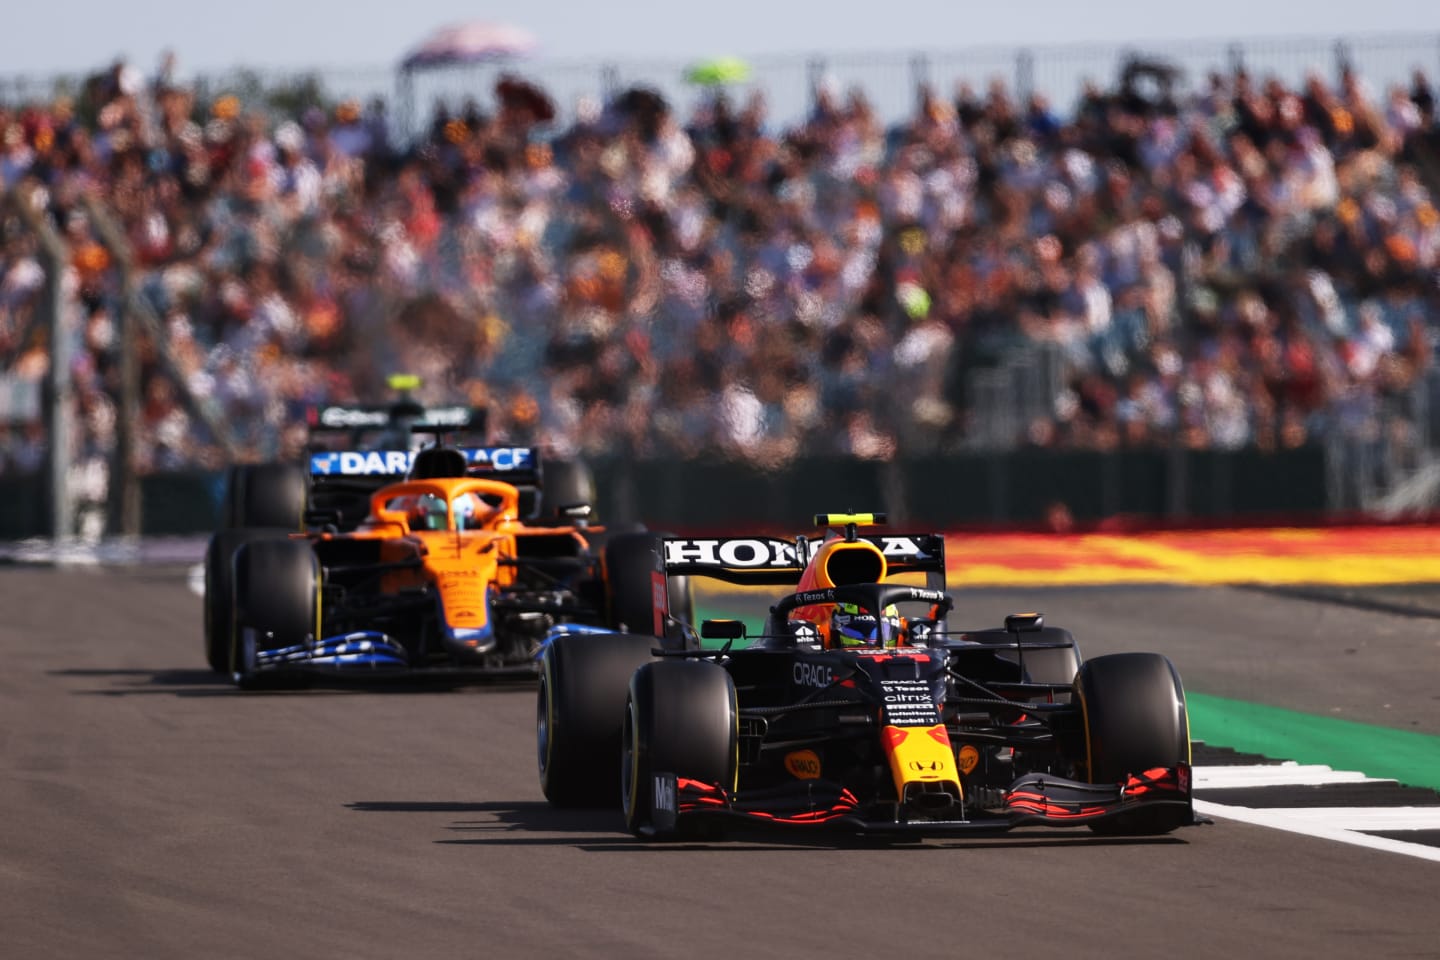 NORTHAMPTON, ENGLAND - JULY 17: Sergio Perez of Mexico driving the (11) Red Bull Racing RB16B Honda leads Daniel Ricciardo of Australia driving the (3) McLaren F1 Team MCL35M Mercedes during the Sprint for the F1 Grand Prix of Great Britain at Silverstone on July 17, 2021 in Northampton, England. (Photo by Lars Baron/Getty Images)